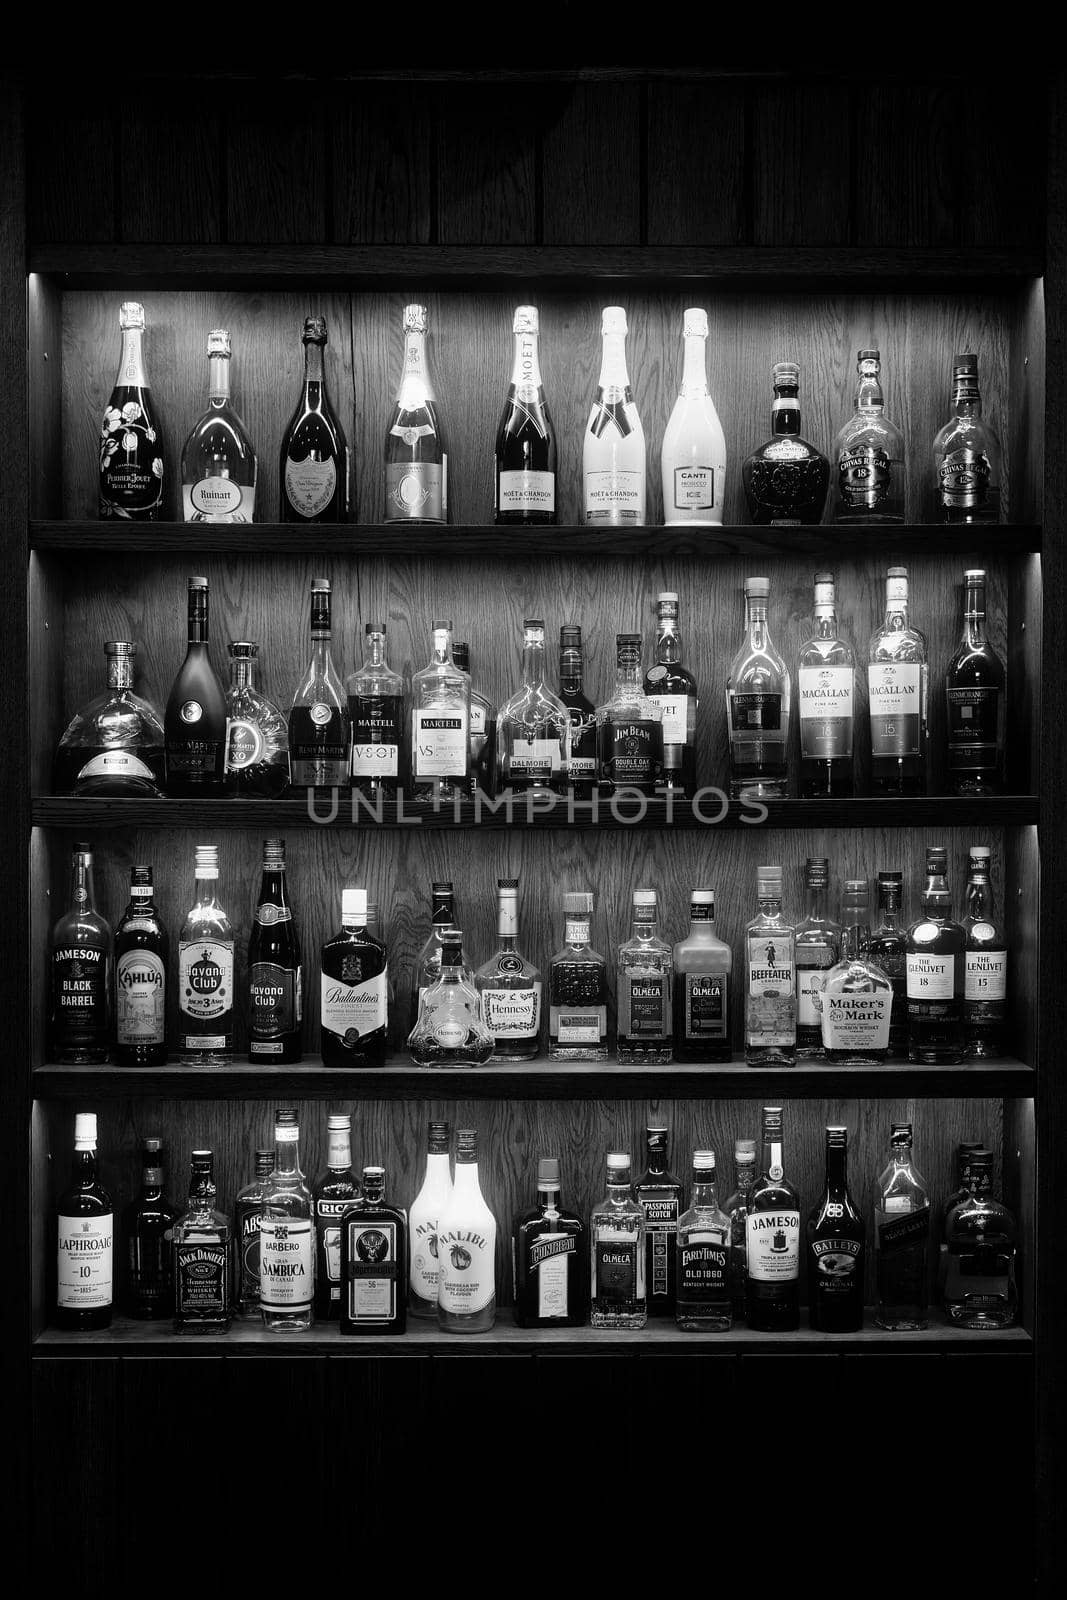 Bottles With Alcoholic in a bar. Bottles of alcoholic beverages are on the shelves. Bar on the wall. 06.06.2021, Rostov region, Russia.